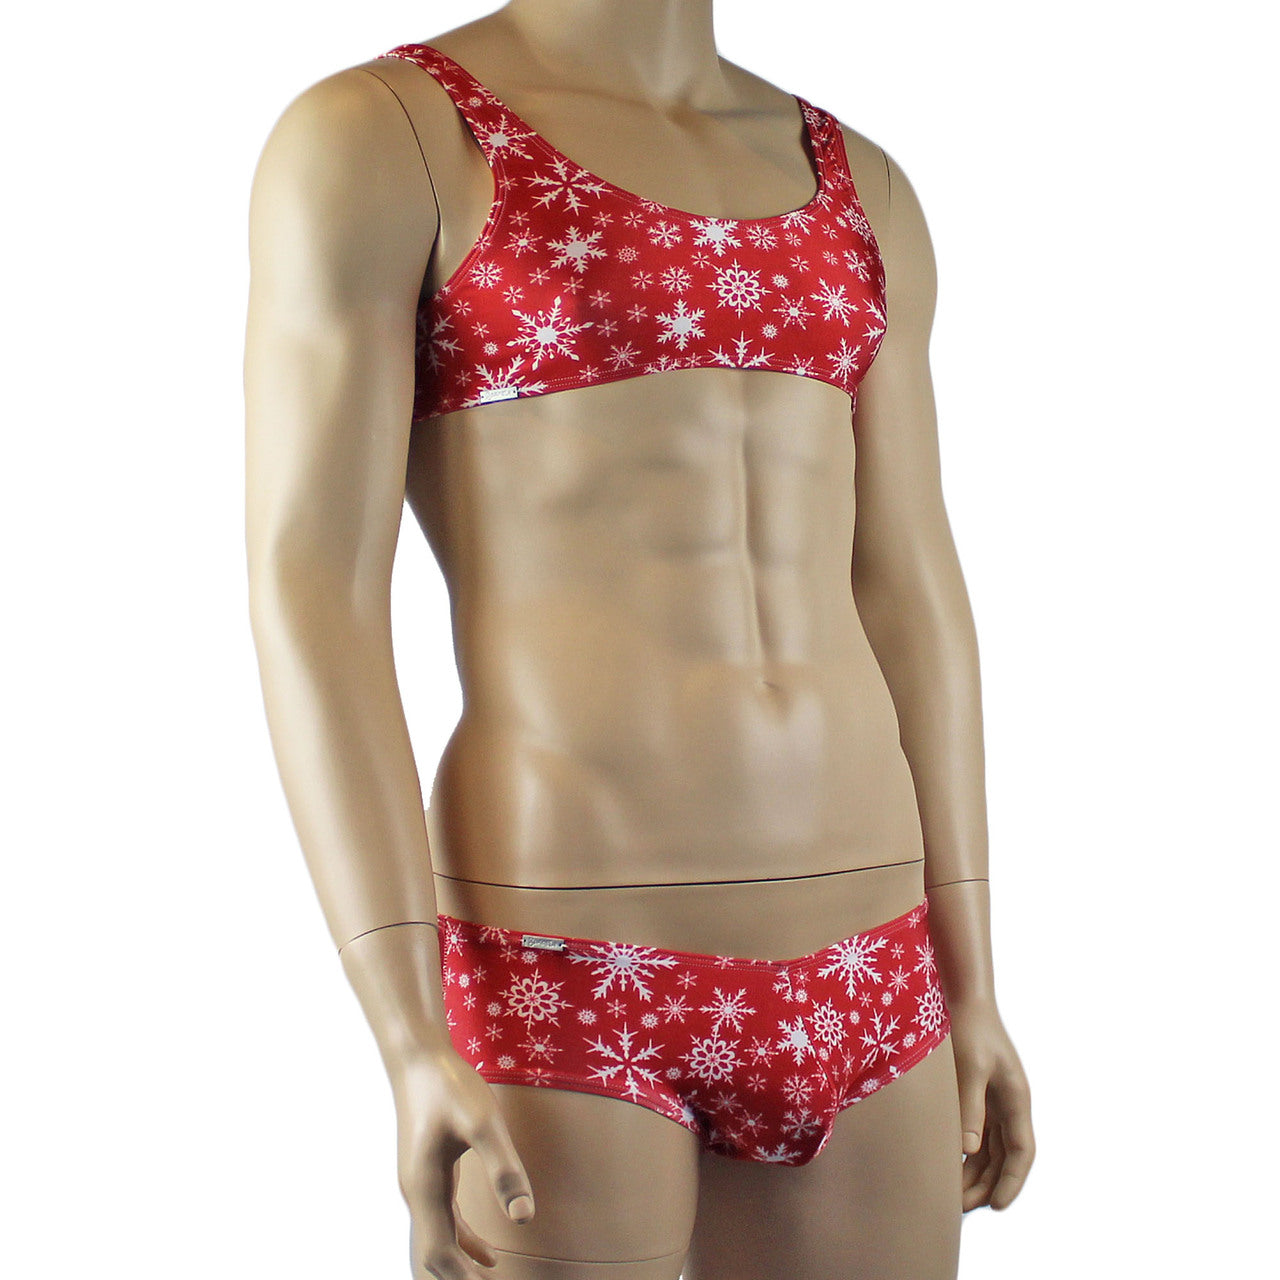 Mens Lingerie Snowflake Bra Top & Low Rise Boxer Brief Red and White